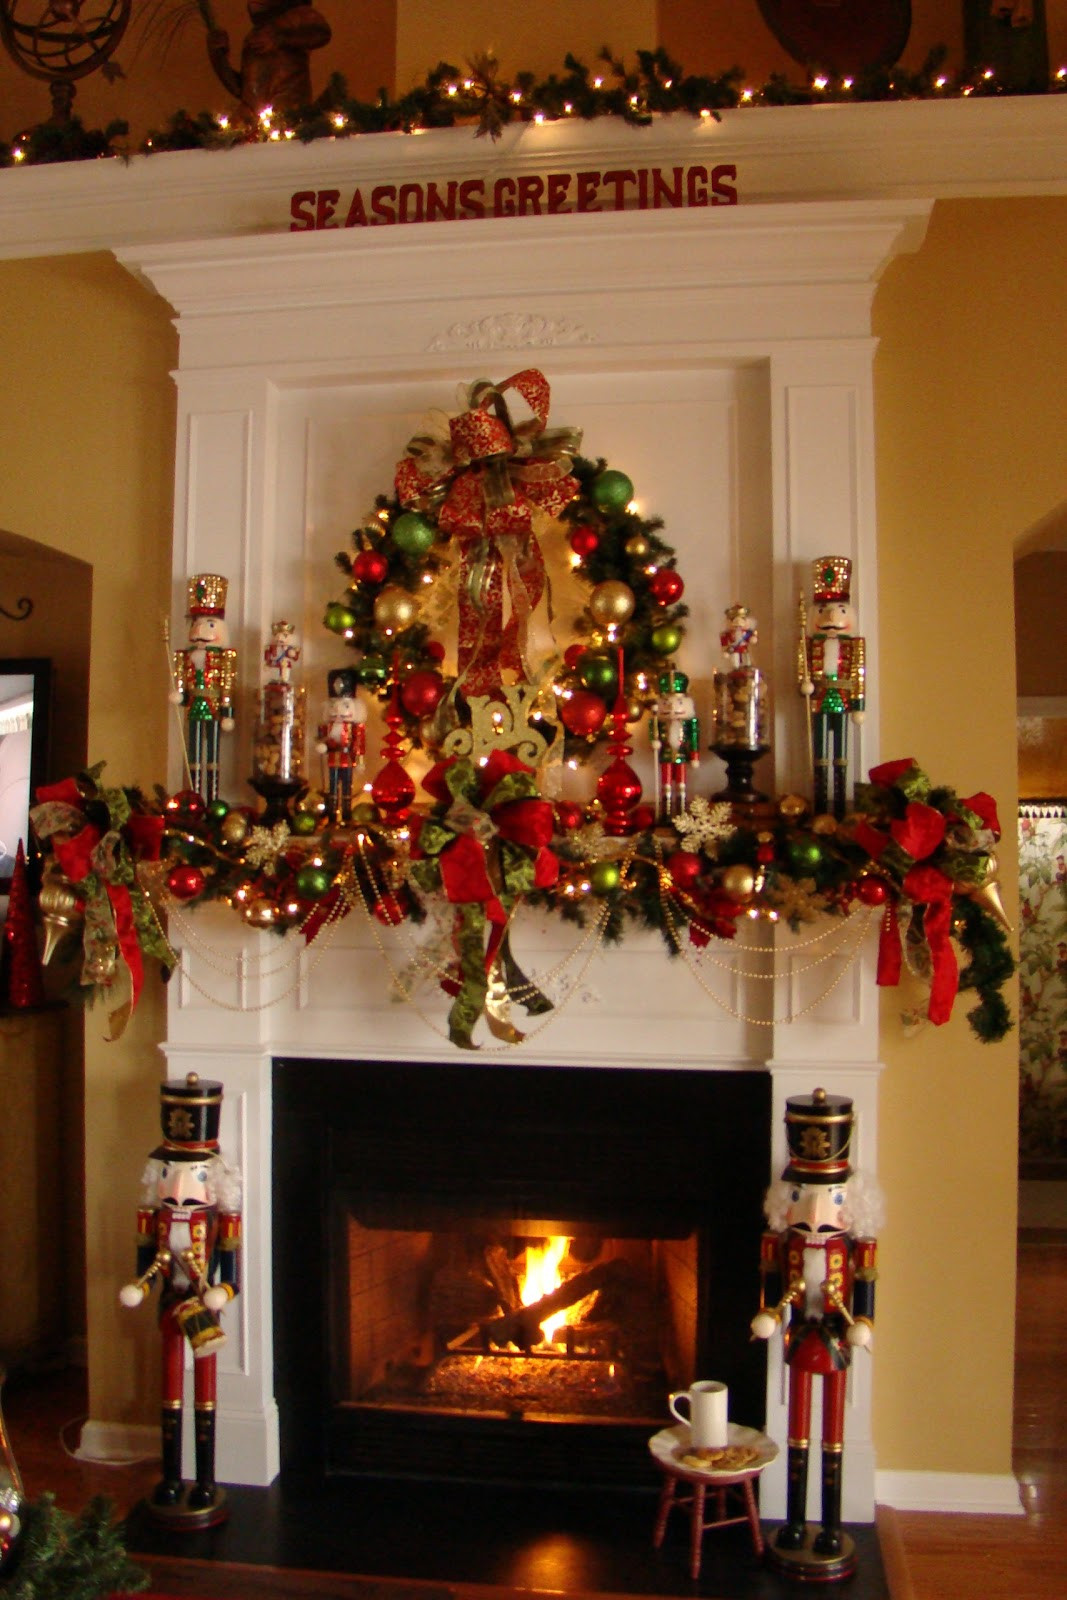 Decorating Fireplace For Christmas
 Adventures in Decorating Nutcracker Mantel